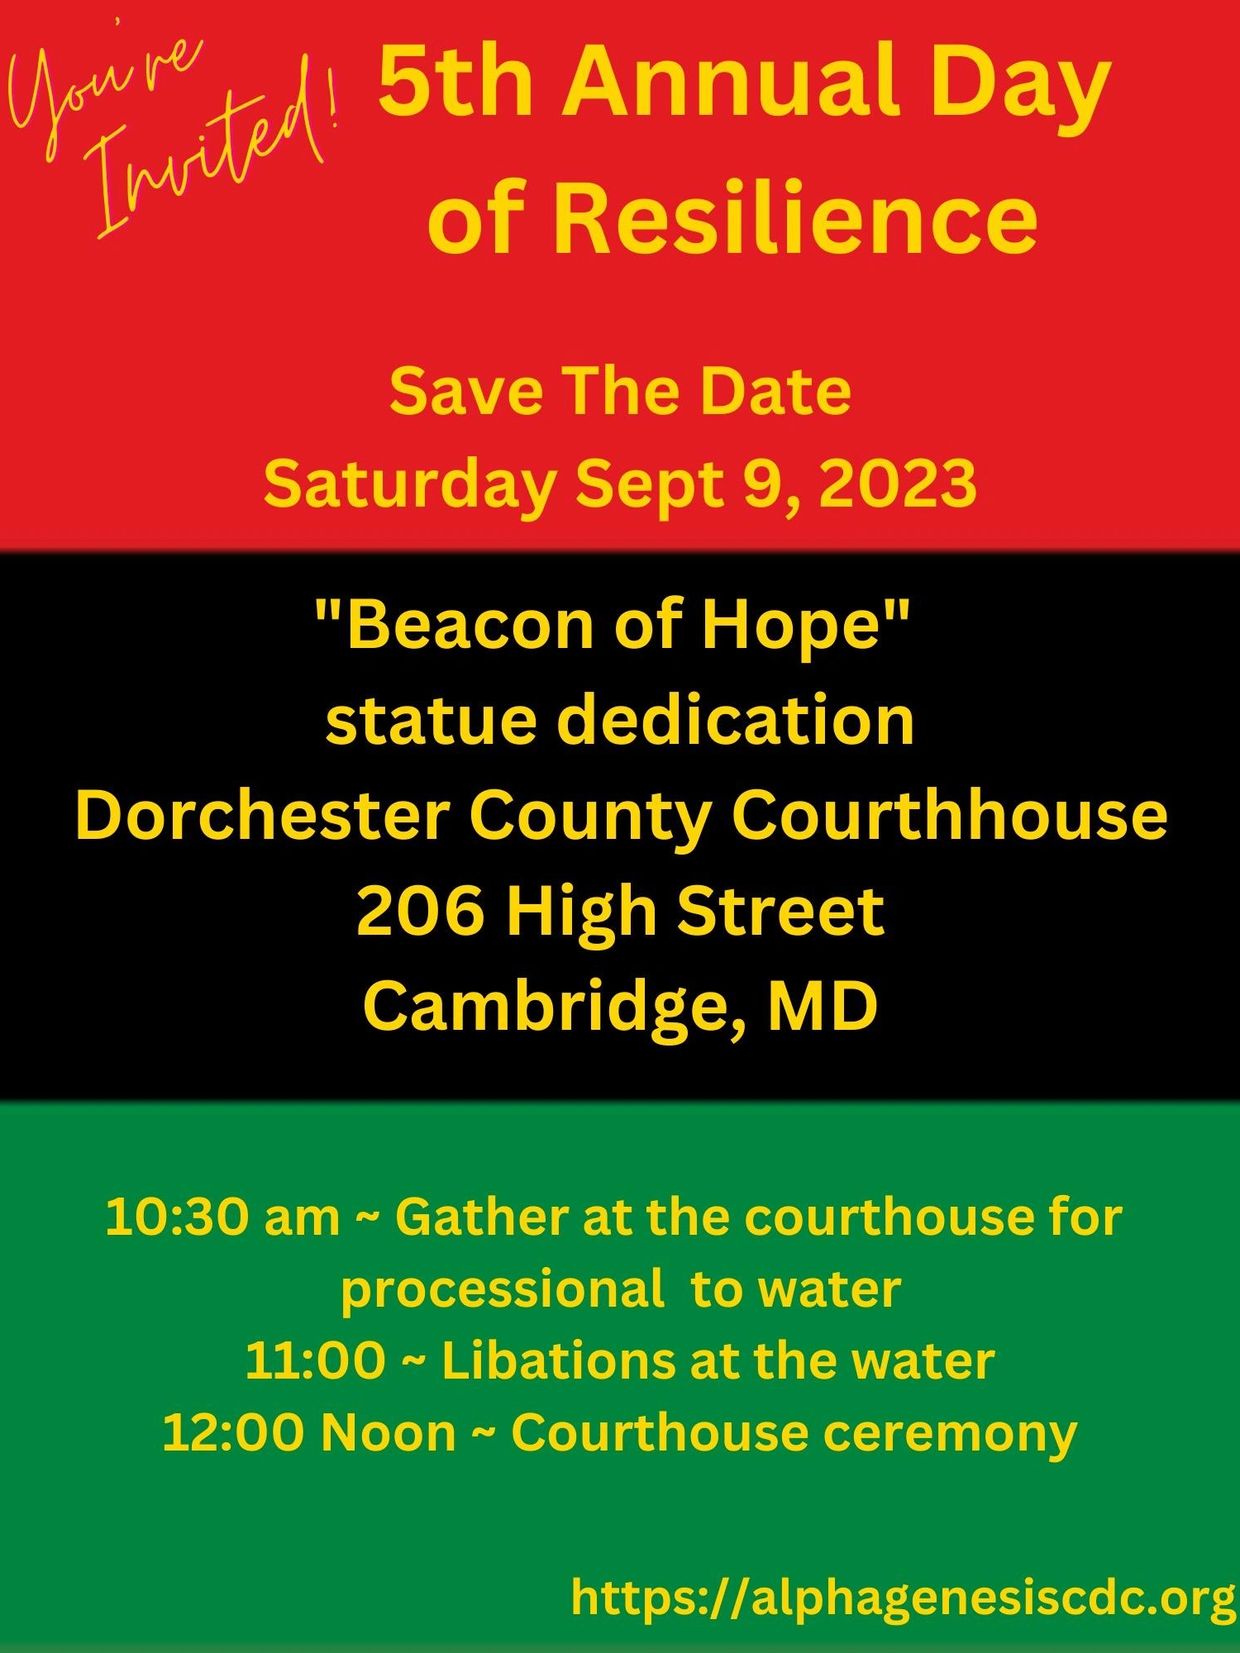 A Day of Resilience 2023
Dedication of the Beacon Of Hope Statue
Cambridge, MD 21613